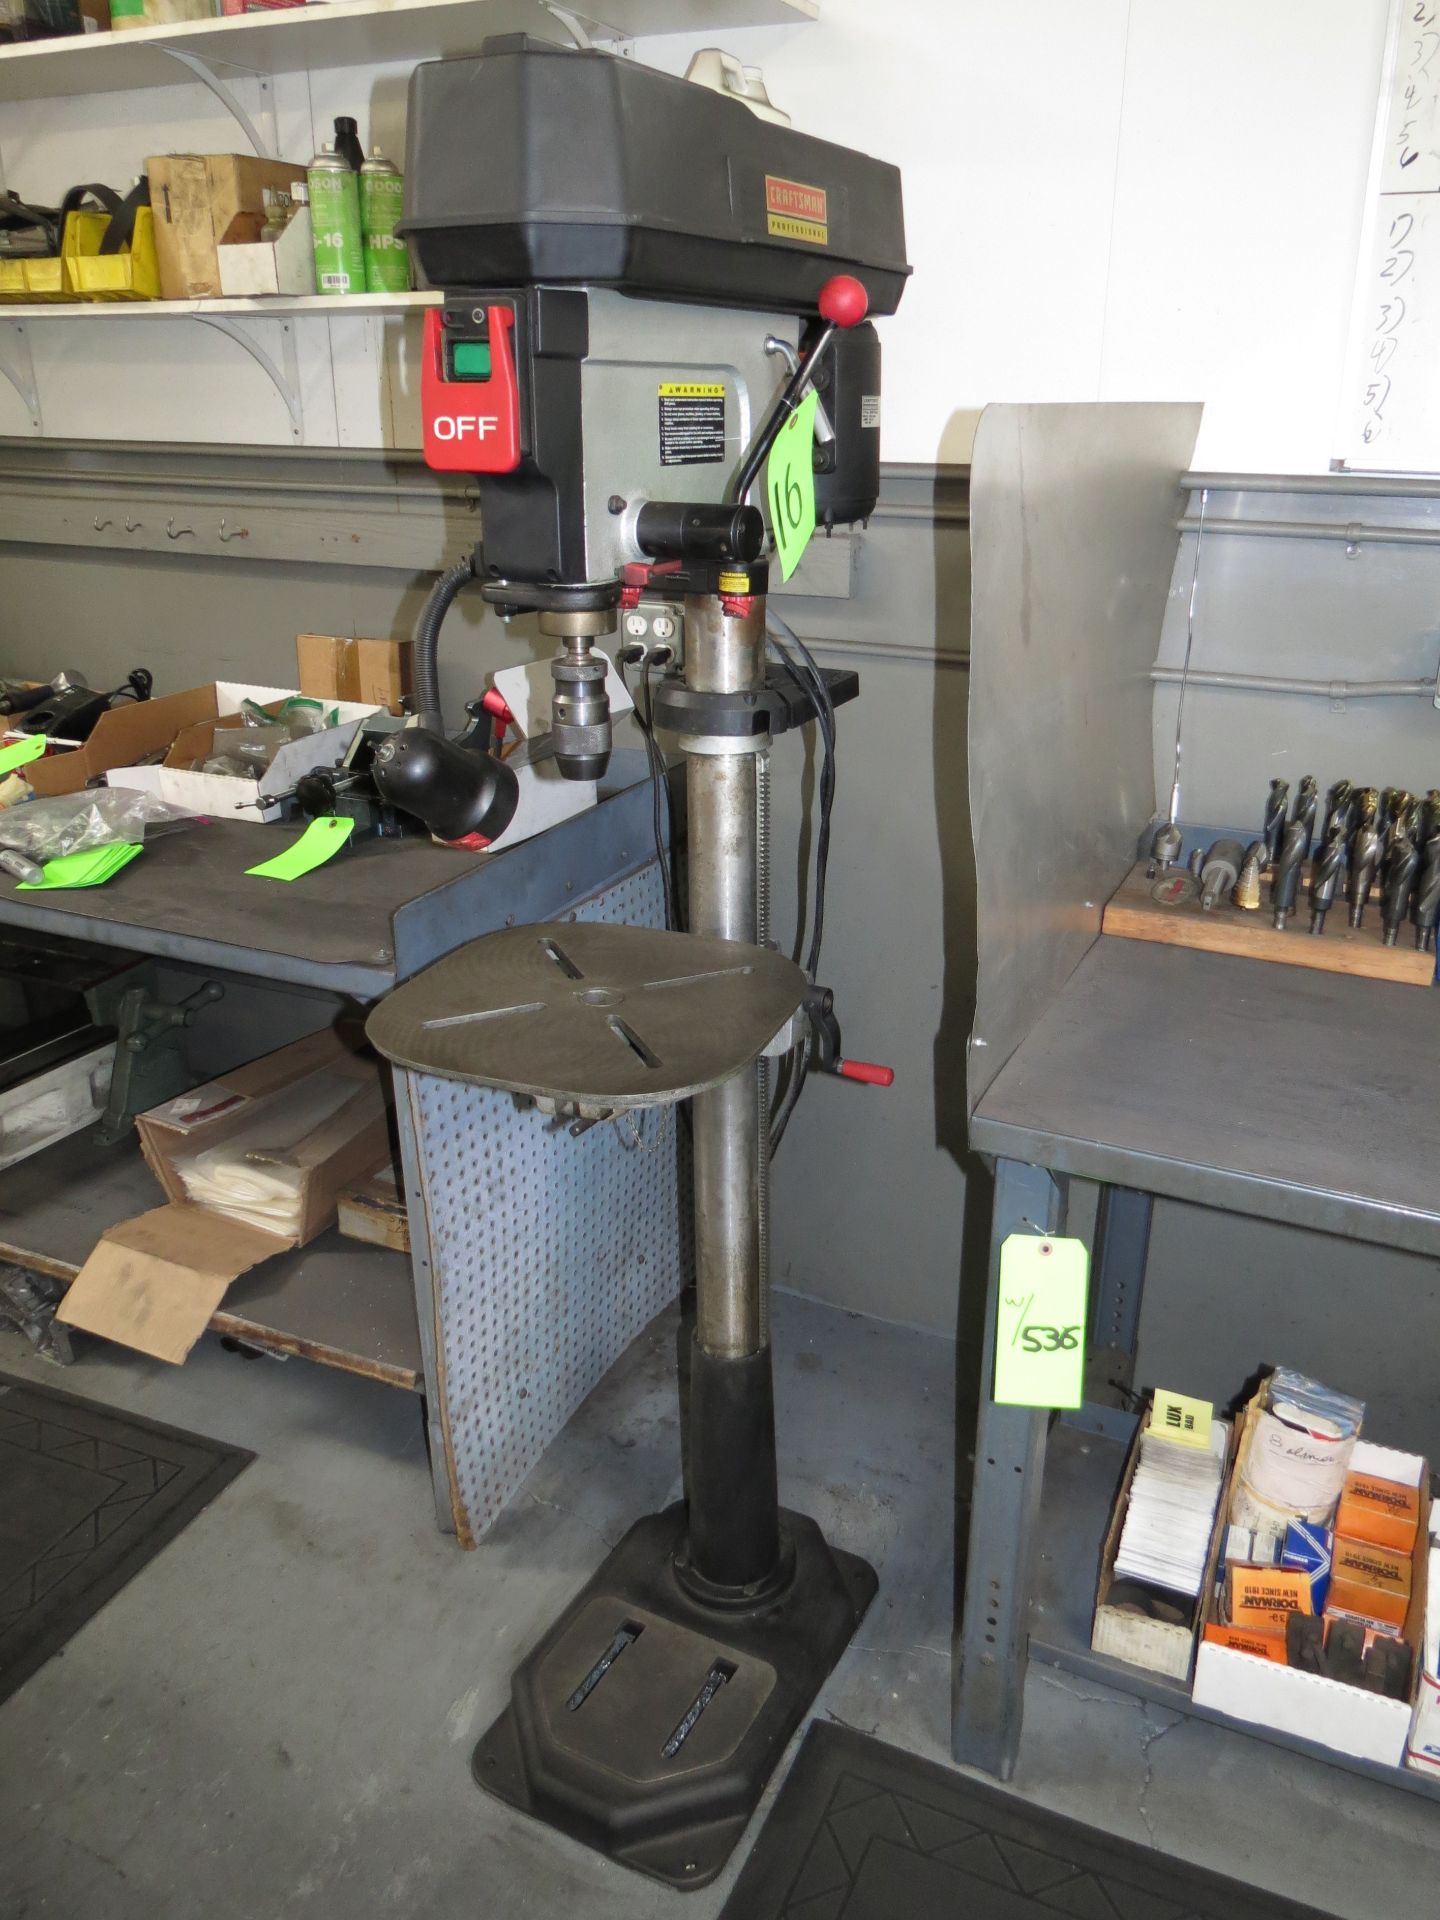 CRAFTSMAN 17" DRILL PRESS WITH LASER TRAC MDL: 152229010 SN: 0525-W - Image 2 of 5